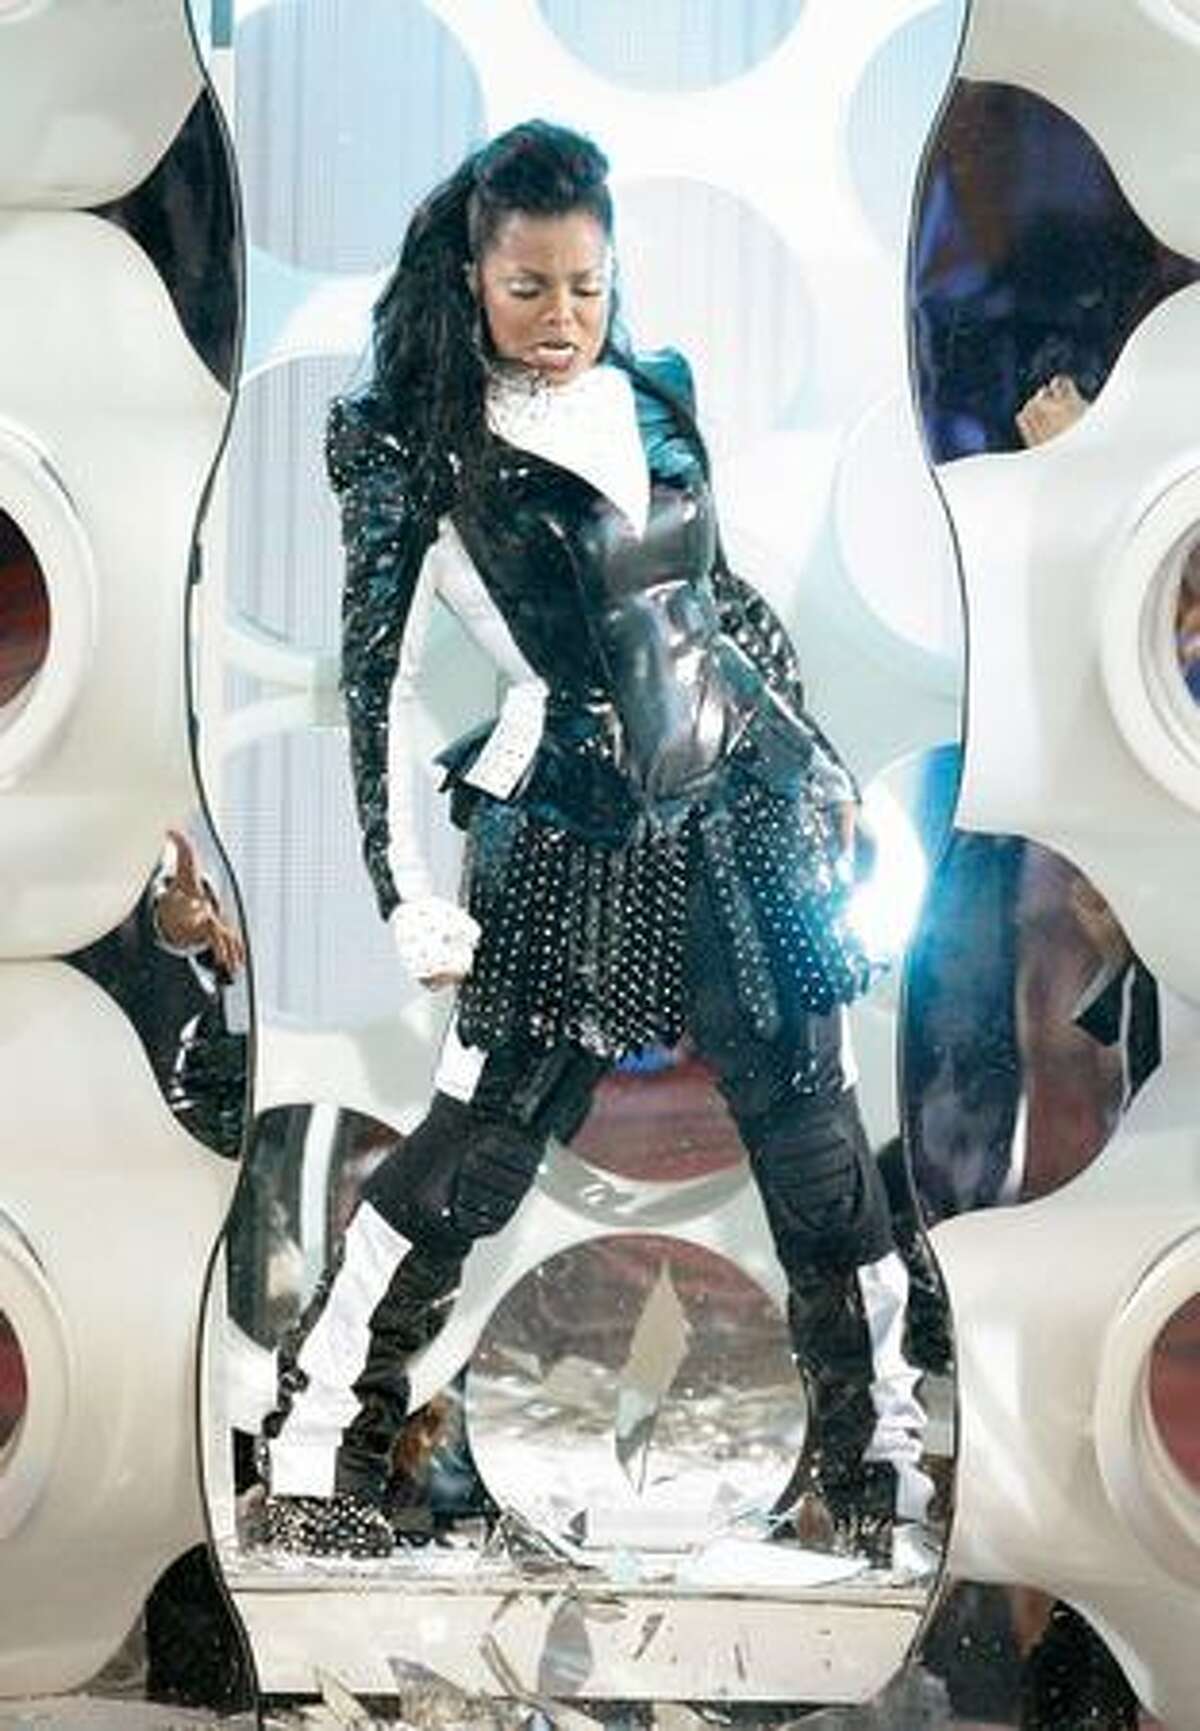 Singer Janet Jackson performs during the 2009 MTV Video Music Awards at Radio City Music Hall in New York on Sunday.